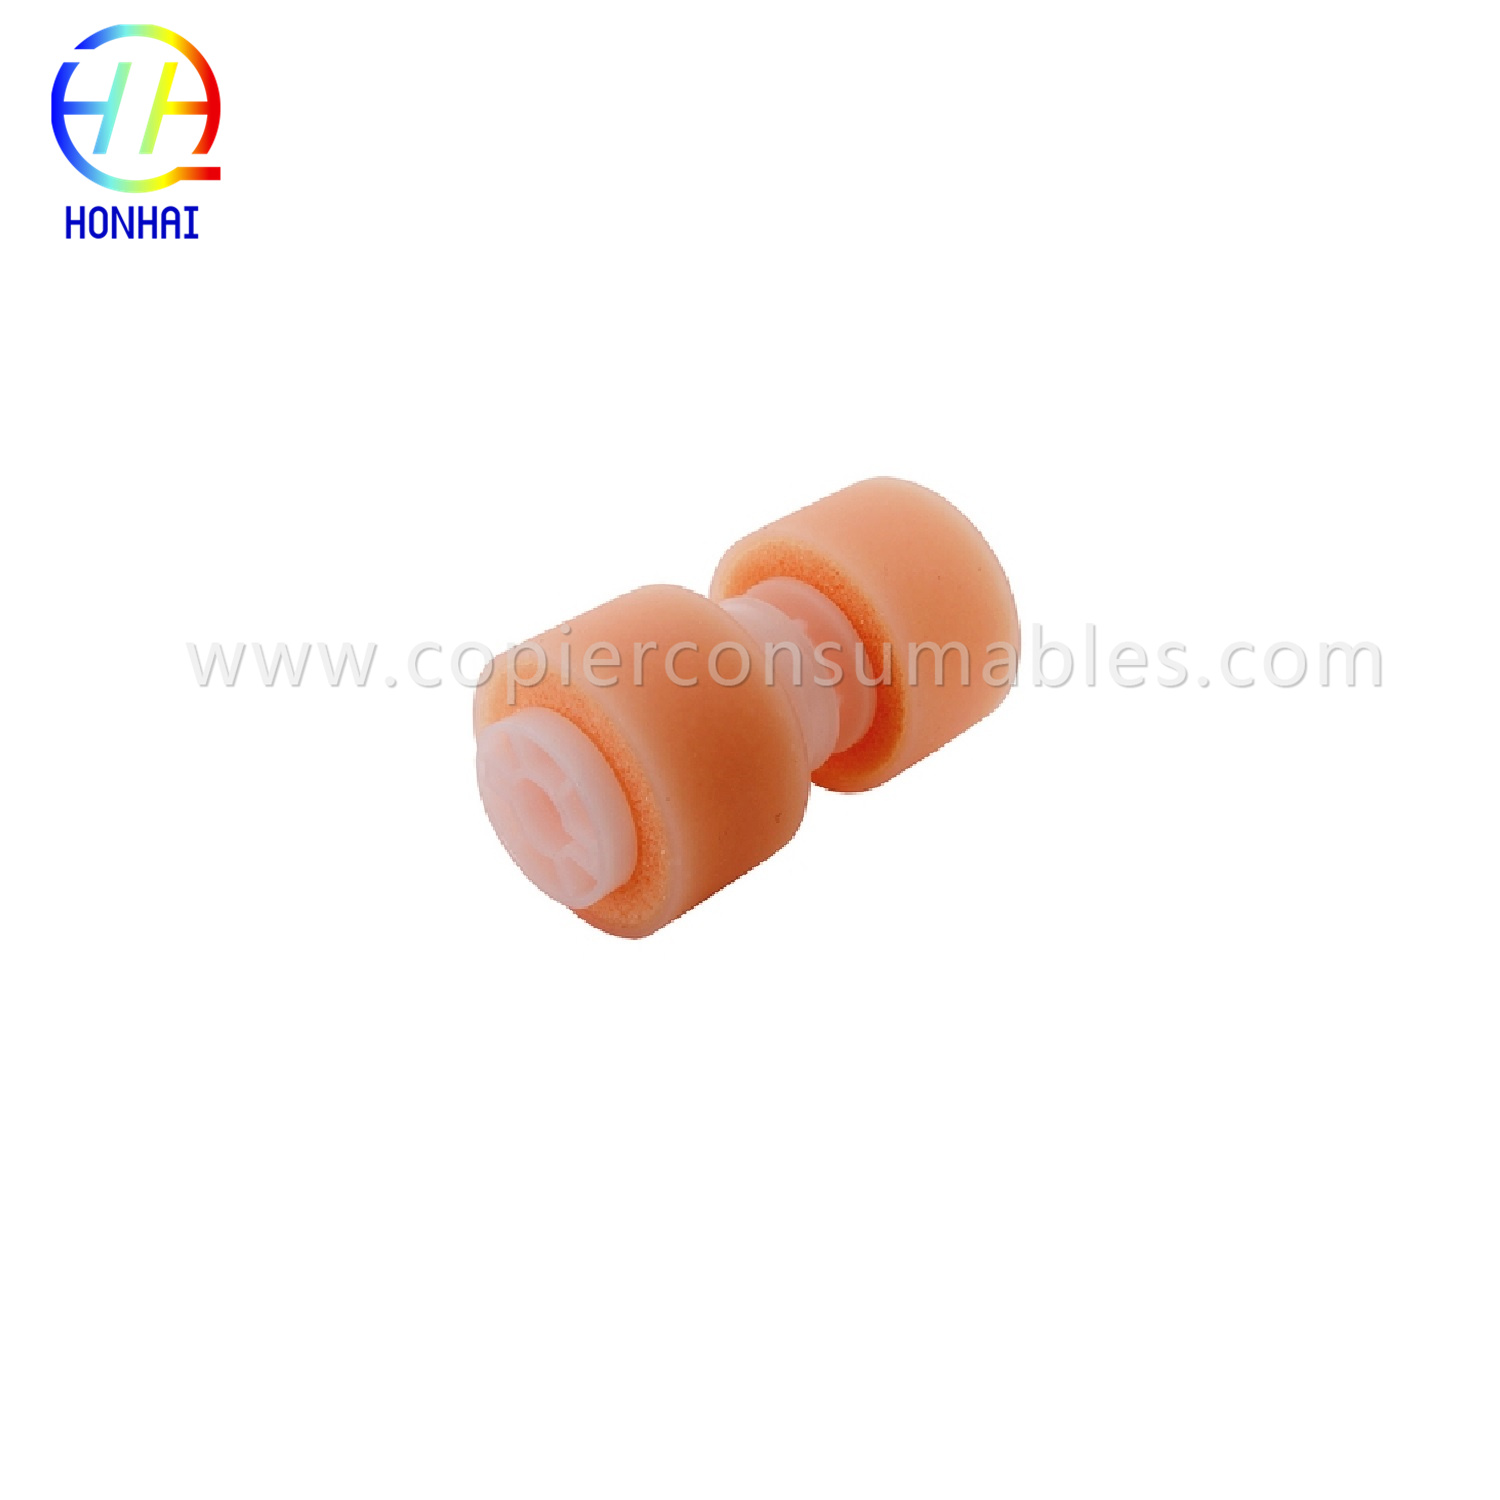 Manwal (Bypass) Pickup Roller HP Color Laserjet Cp2025 M476dn M375nw M451dn (RL-1802-000